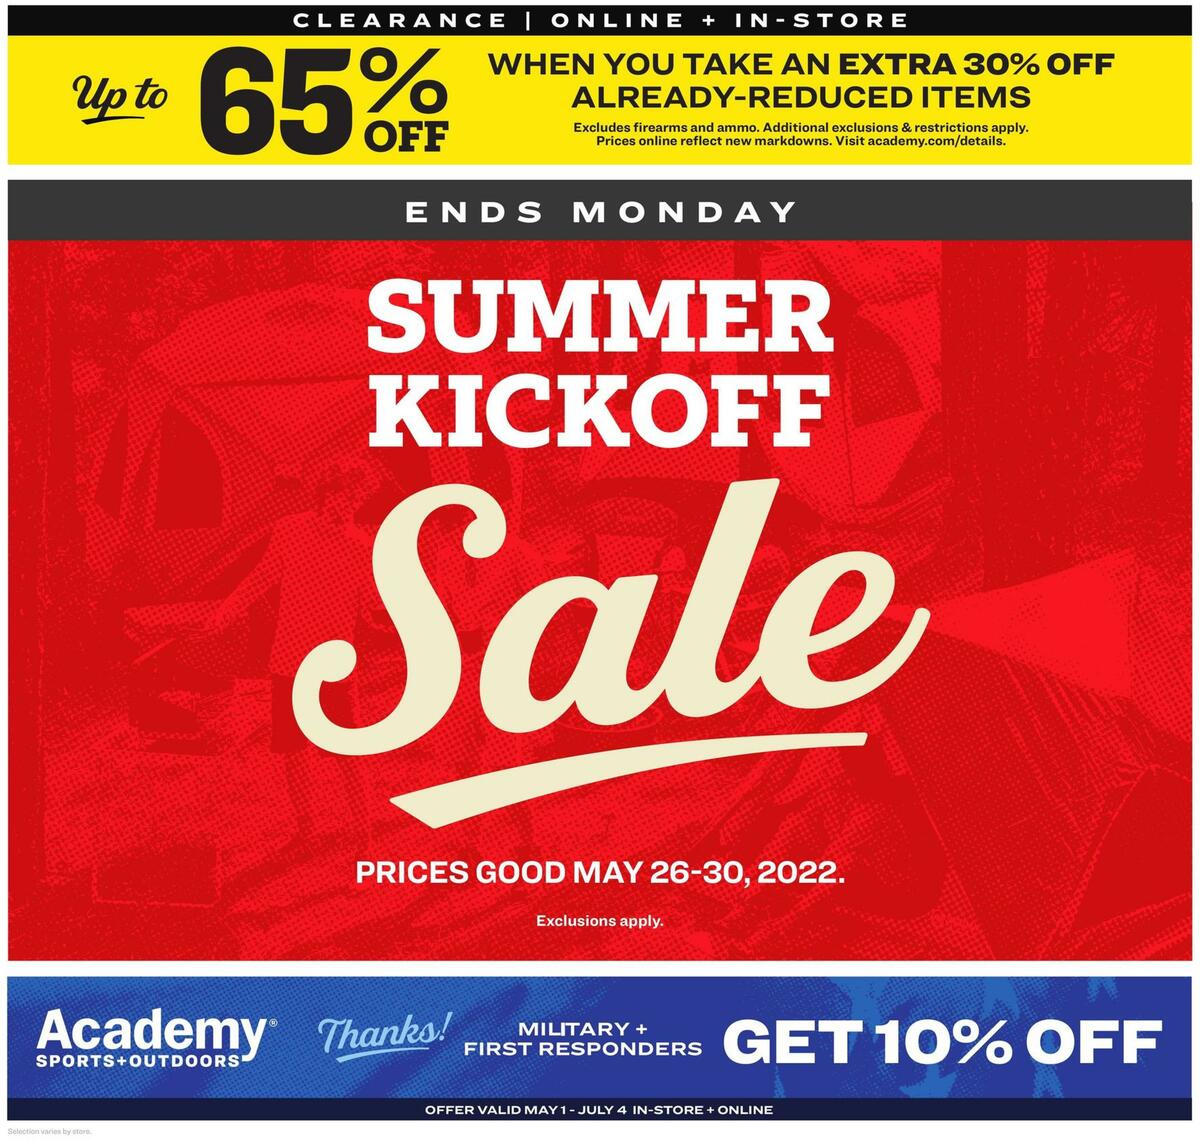 Academy Sports + Outdoors Kickoff Summer Sale Weekly Ads and Circulars